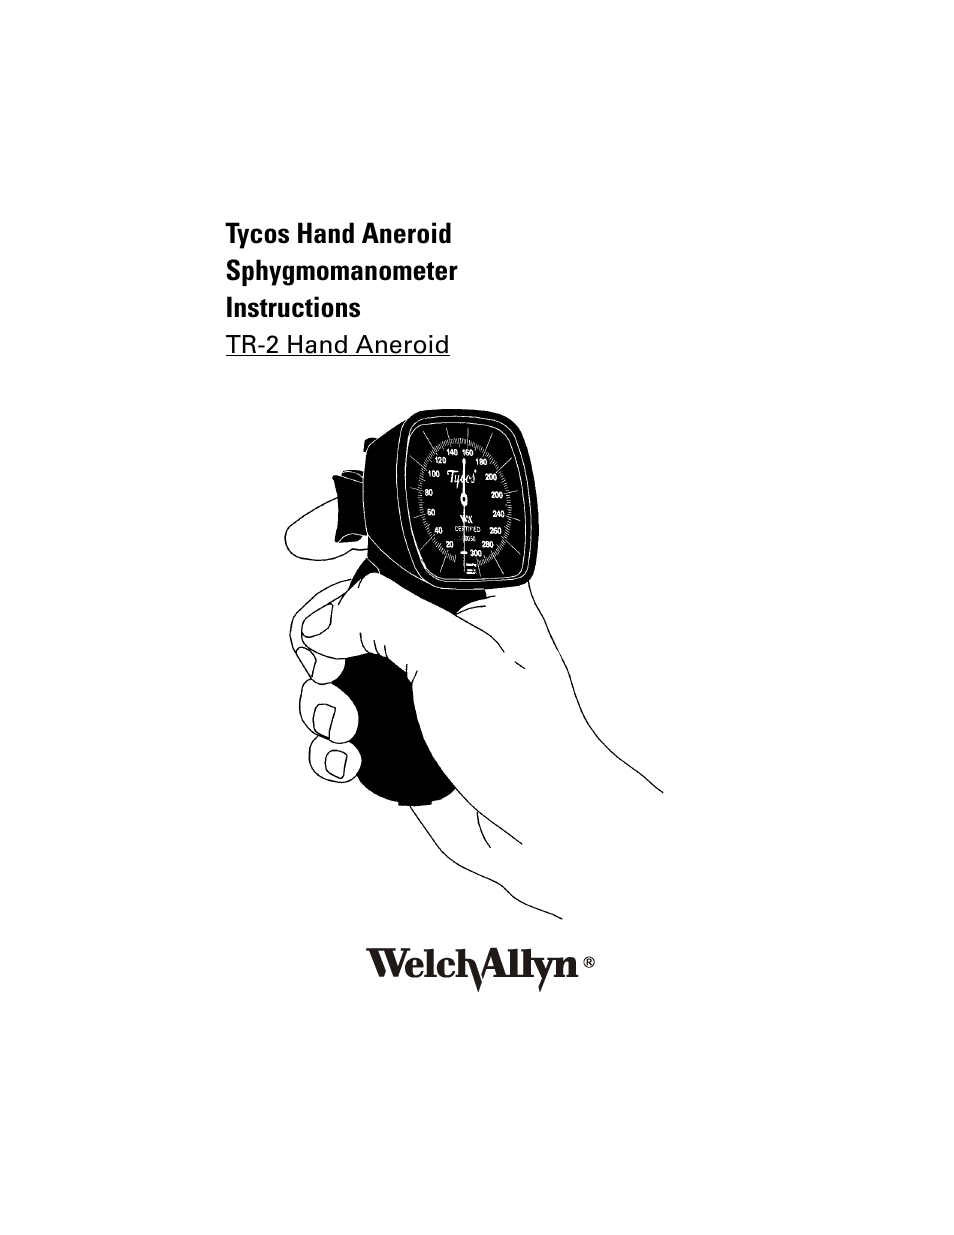 TR-2 Hand Aneroid - User Manual